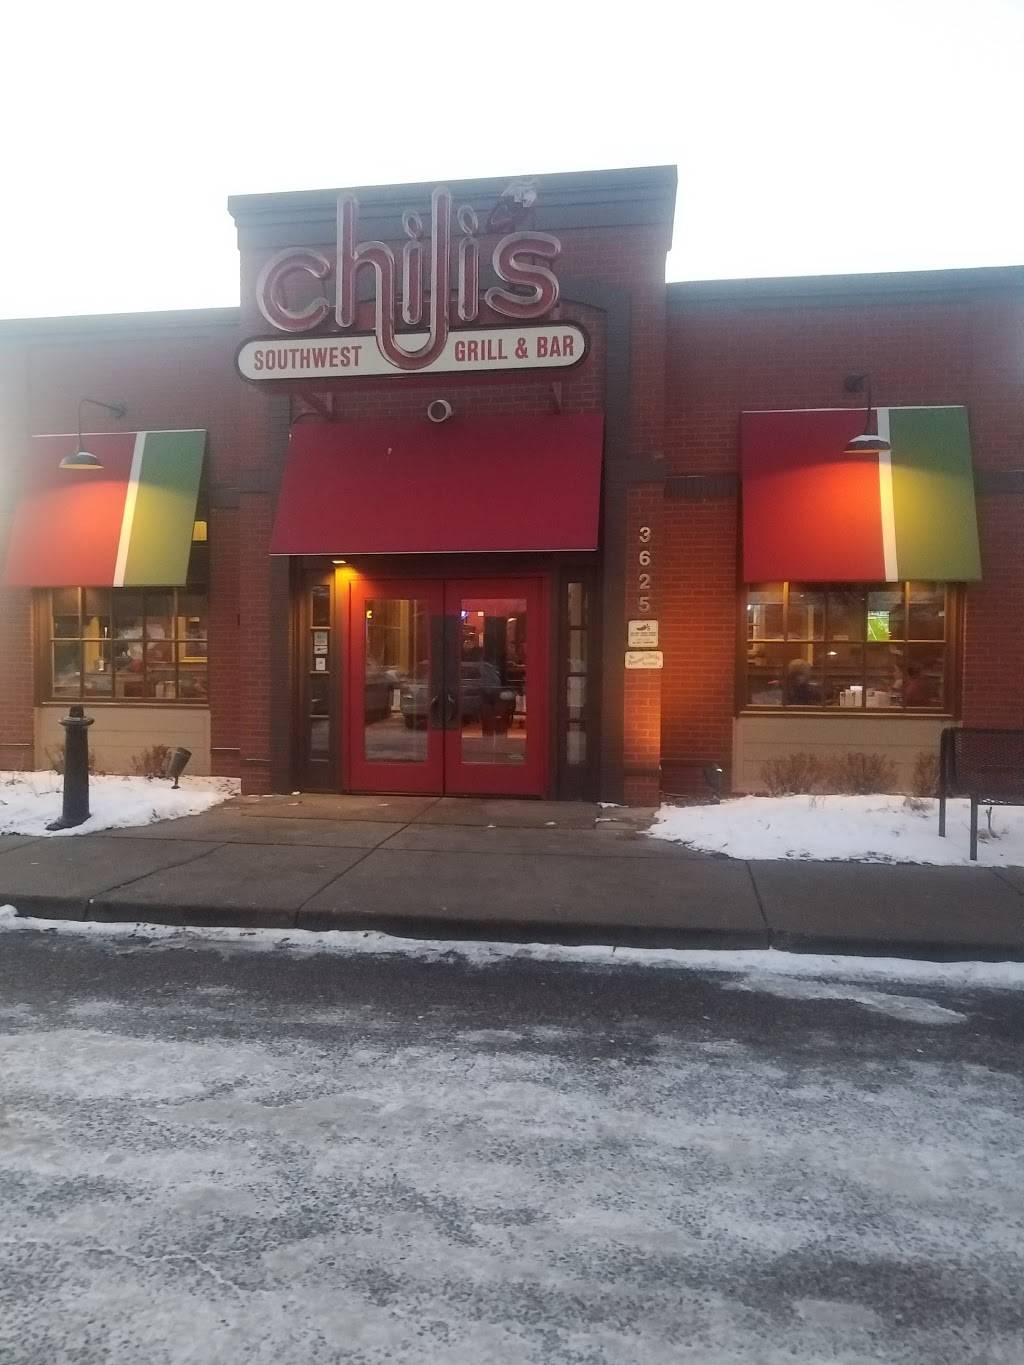 Chilis Grill & Bar | 5000 Houston Rd, Florence, KY 41042 | Phone: (859) 980-0650